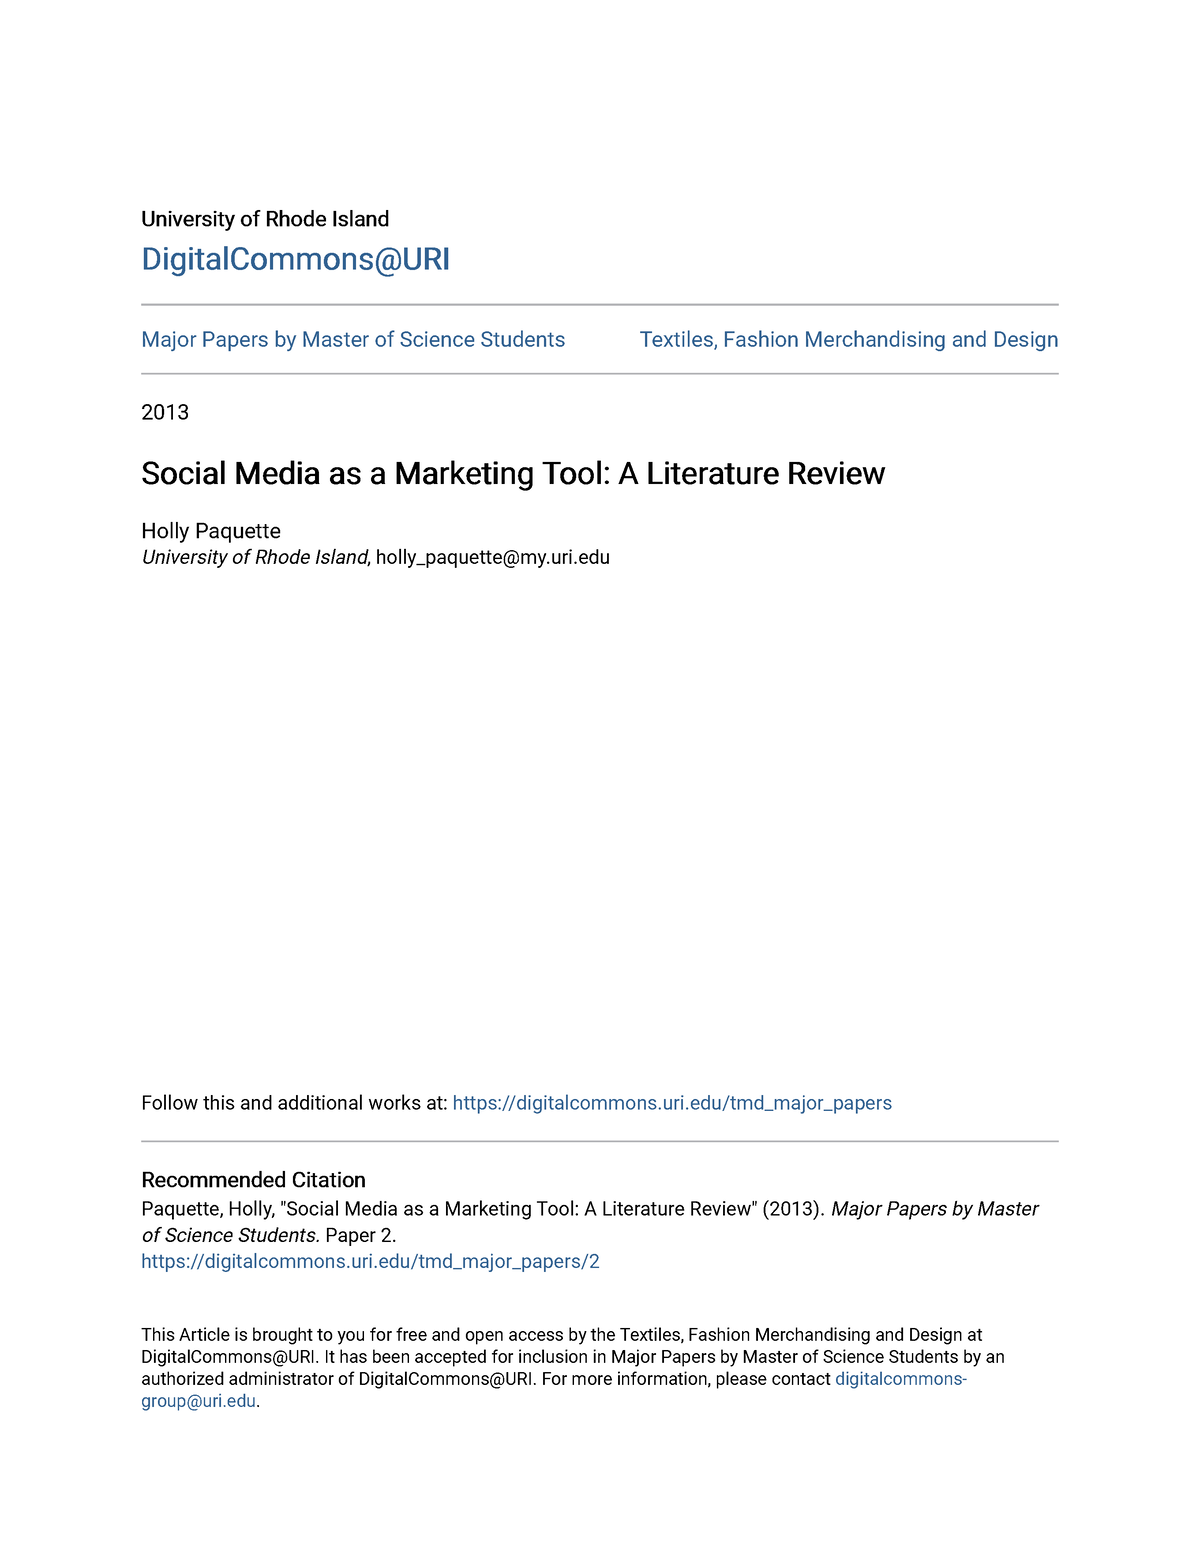 an overview of systematic literature reviews in social media marketing